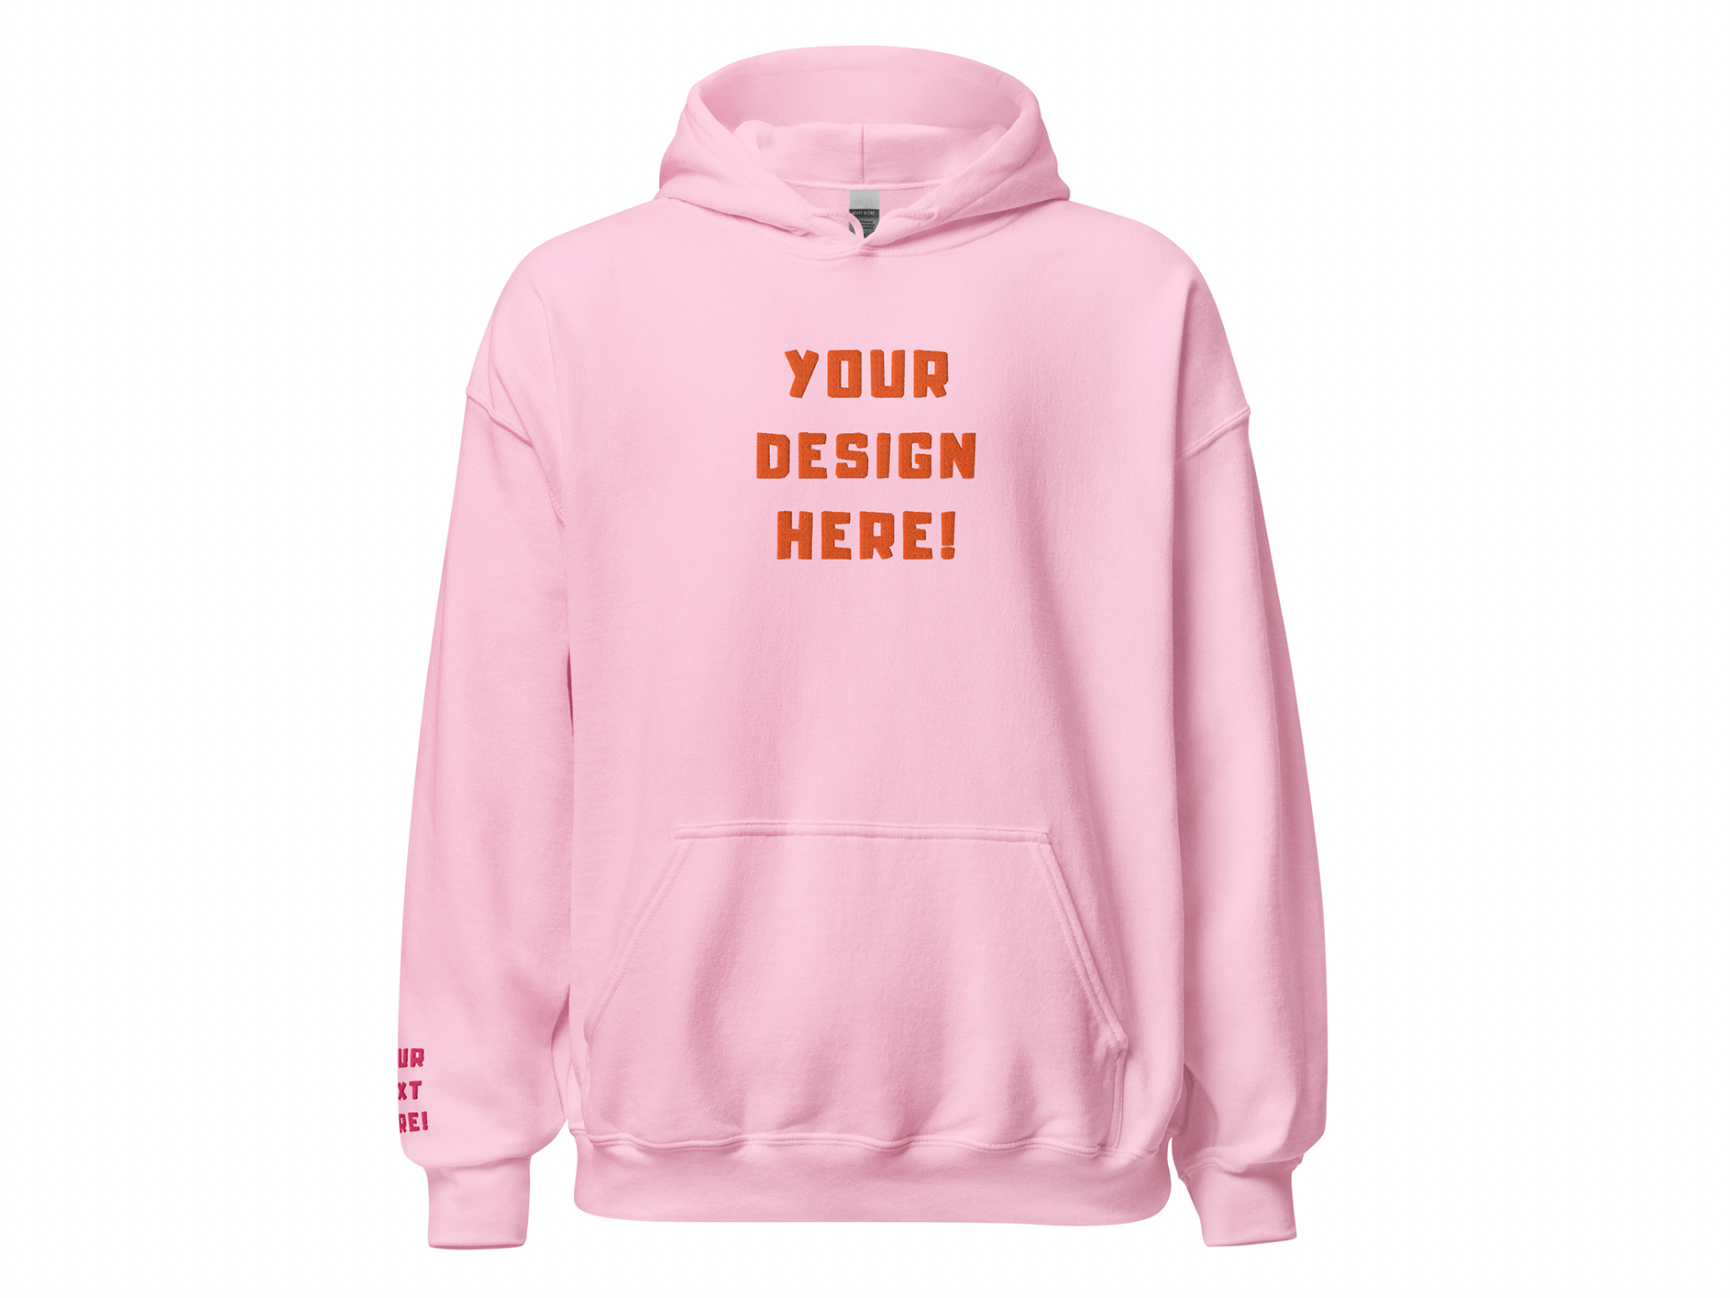 Custom adults embroidered light pink hoodie. Sleeve text is customizable. 